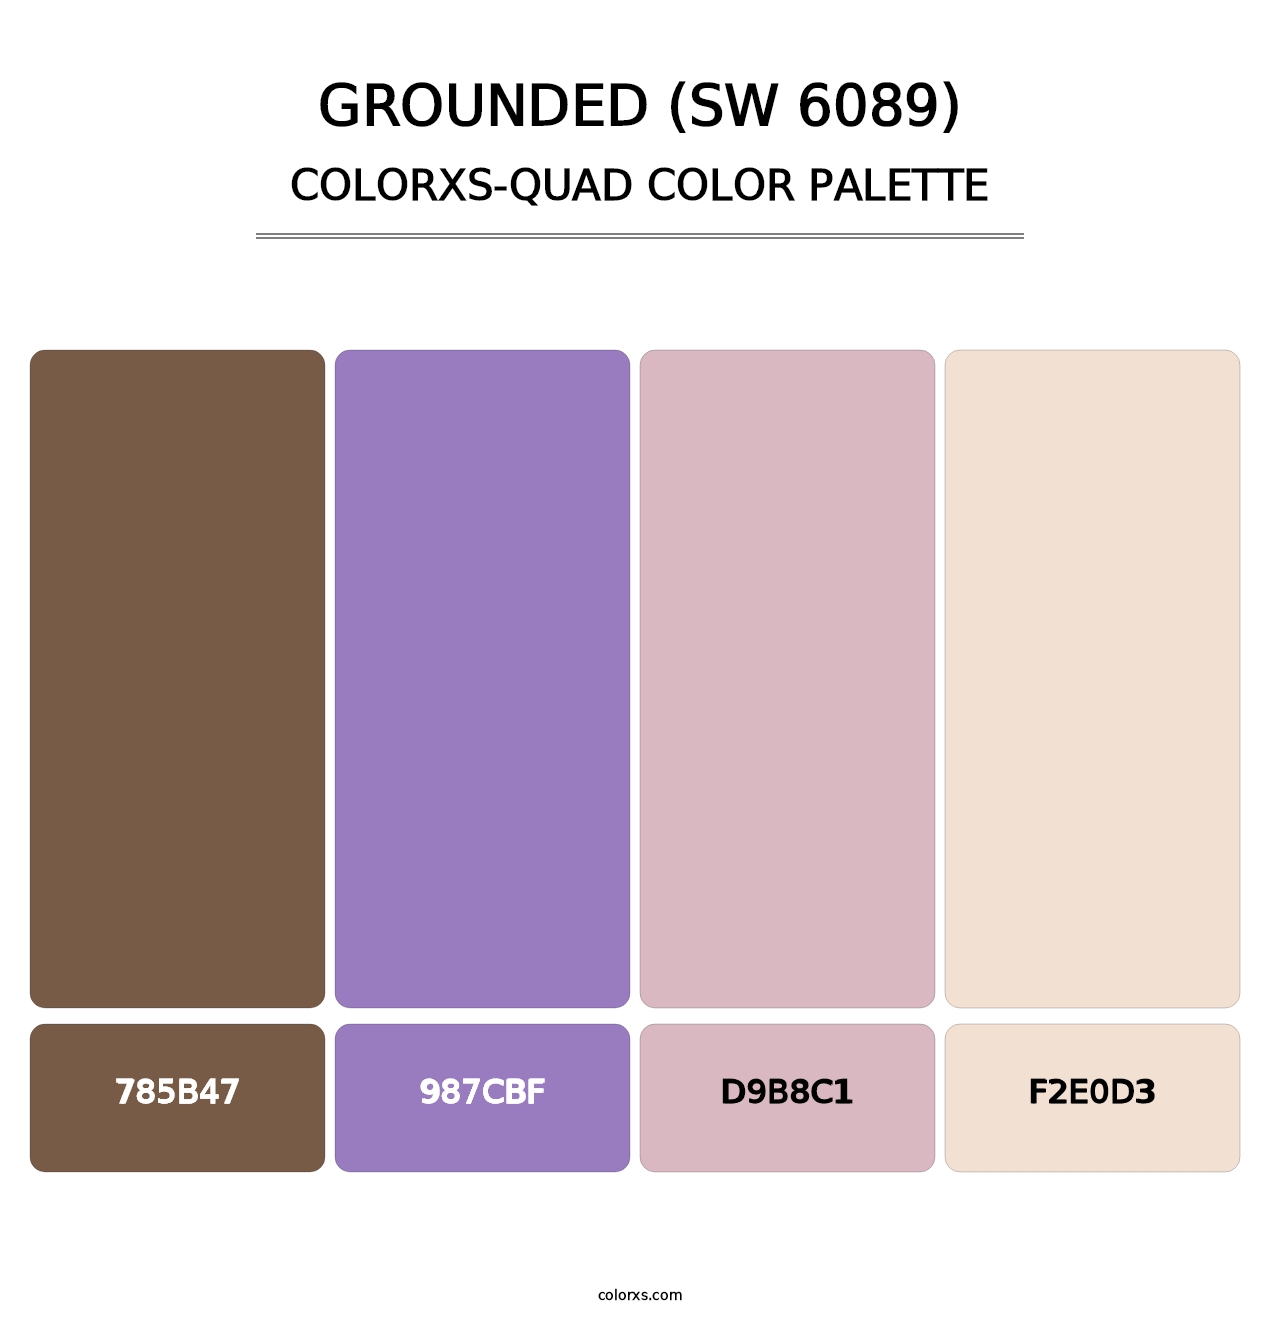 Grounded (SW 6089) - Colorxs Quad Palette